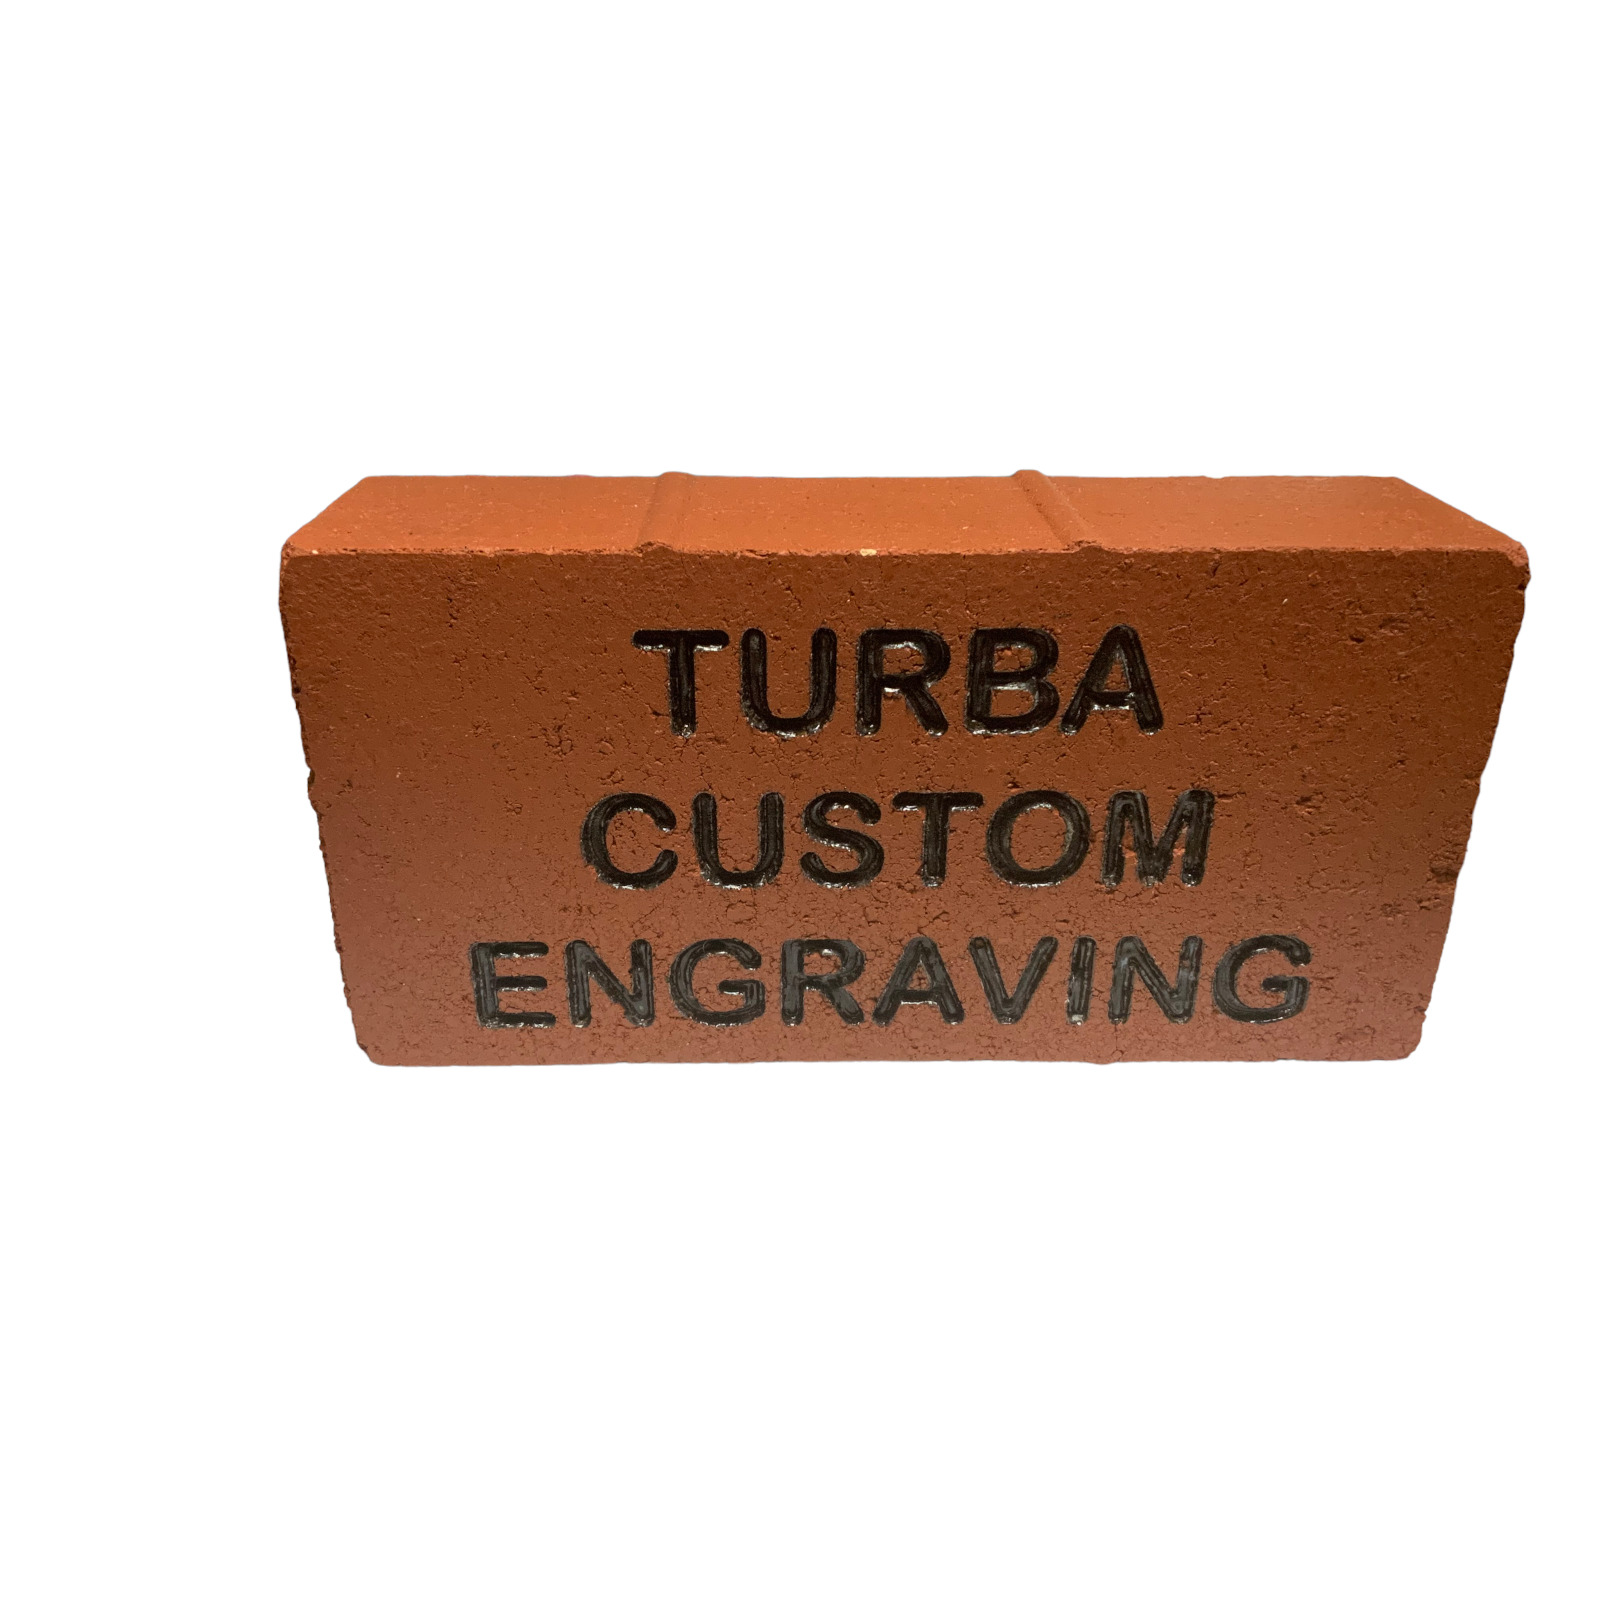 Customizable Laser Engraved Brick (8x8, 4x8 or 2x8) Memorial Stone Gift